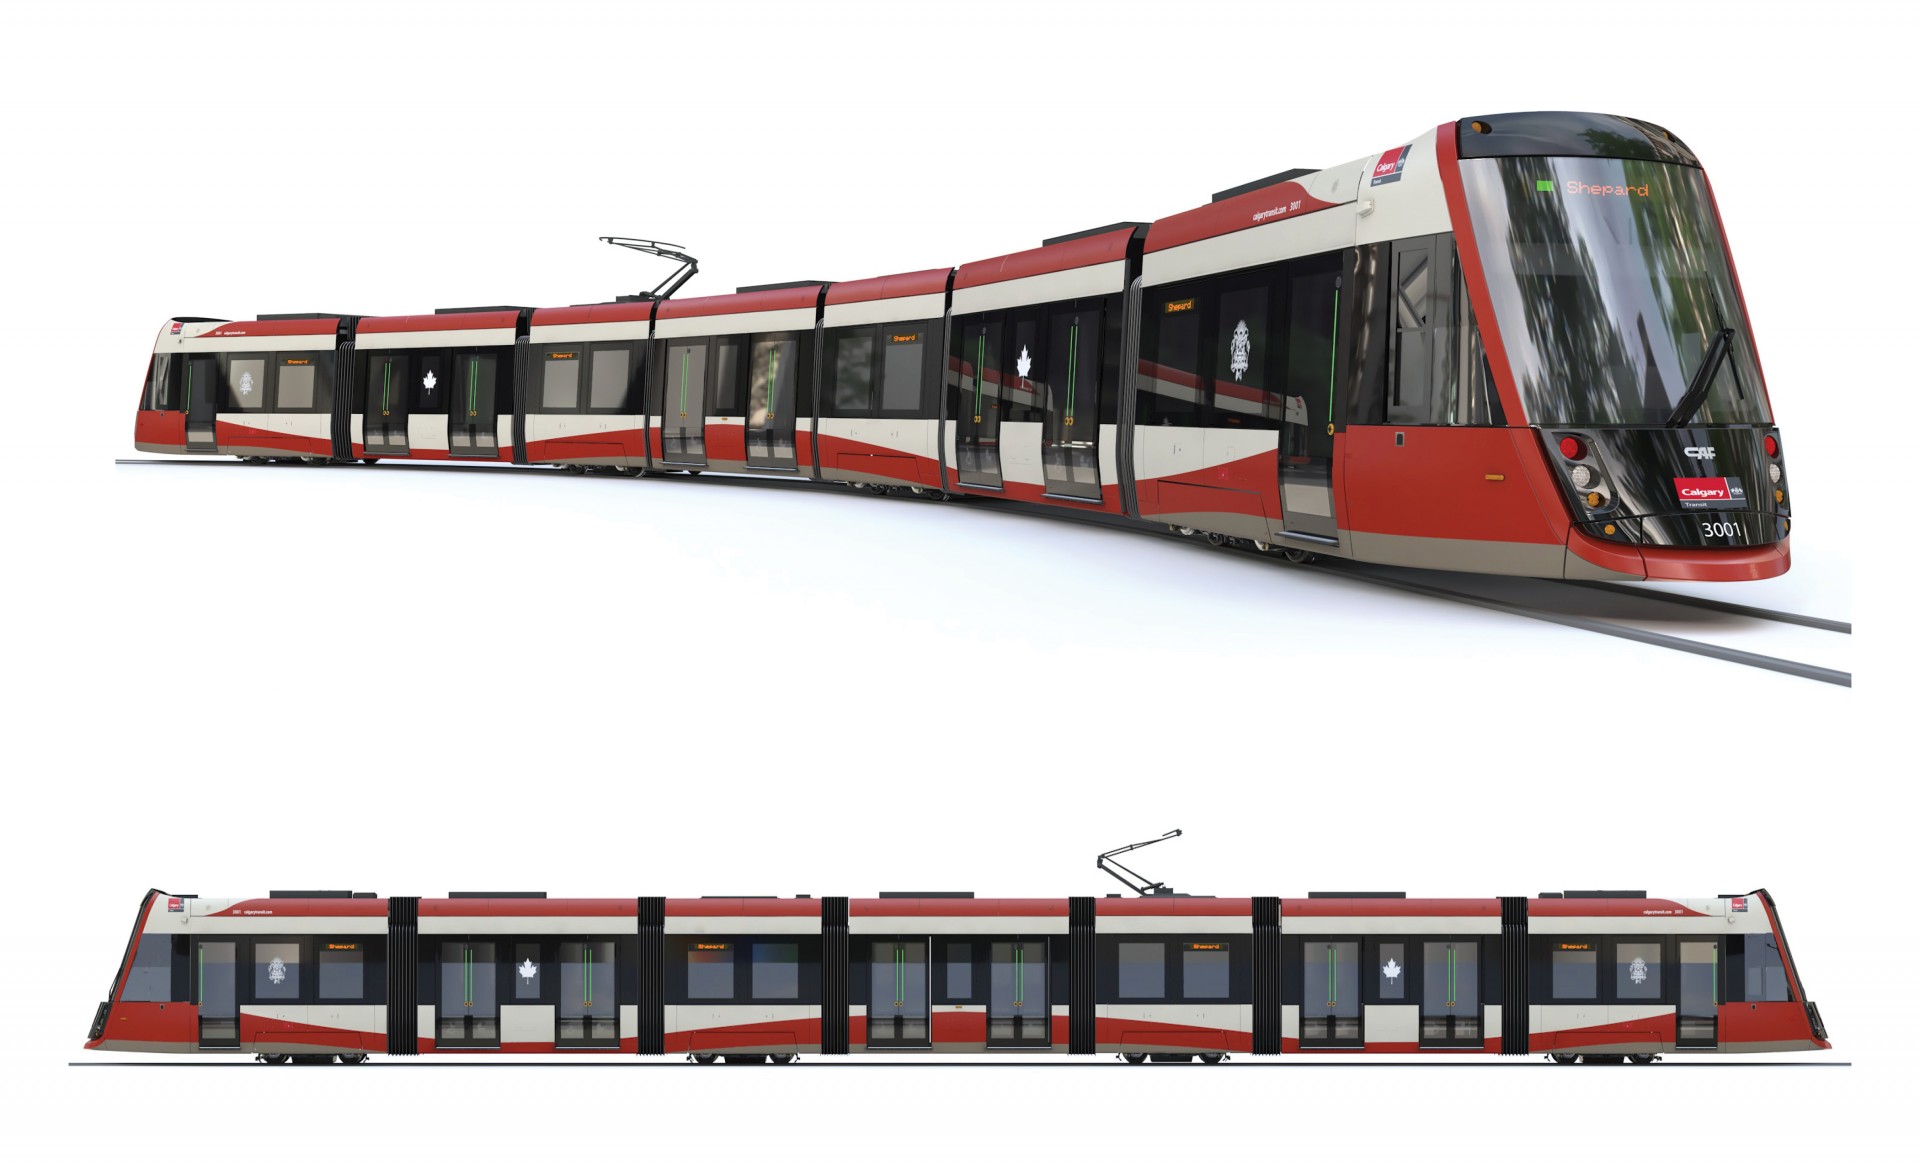 Top image - rendering of CAF Urbos 100 curved to the right. Bottom image - long view from the side of the train.